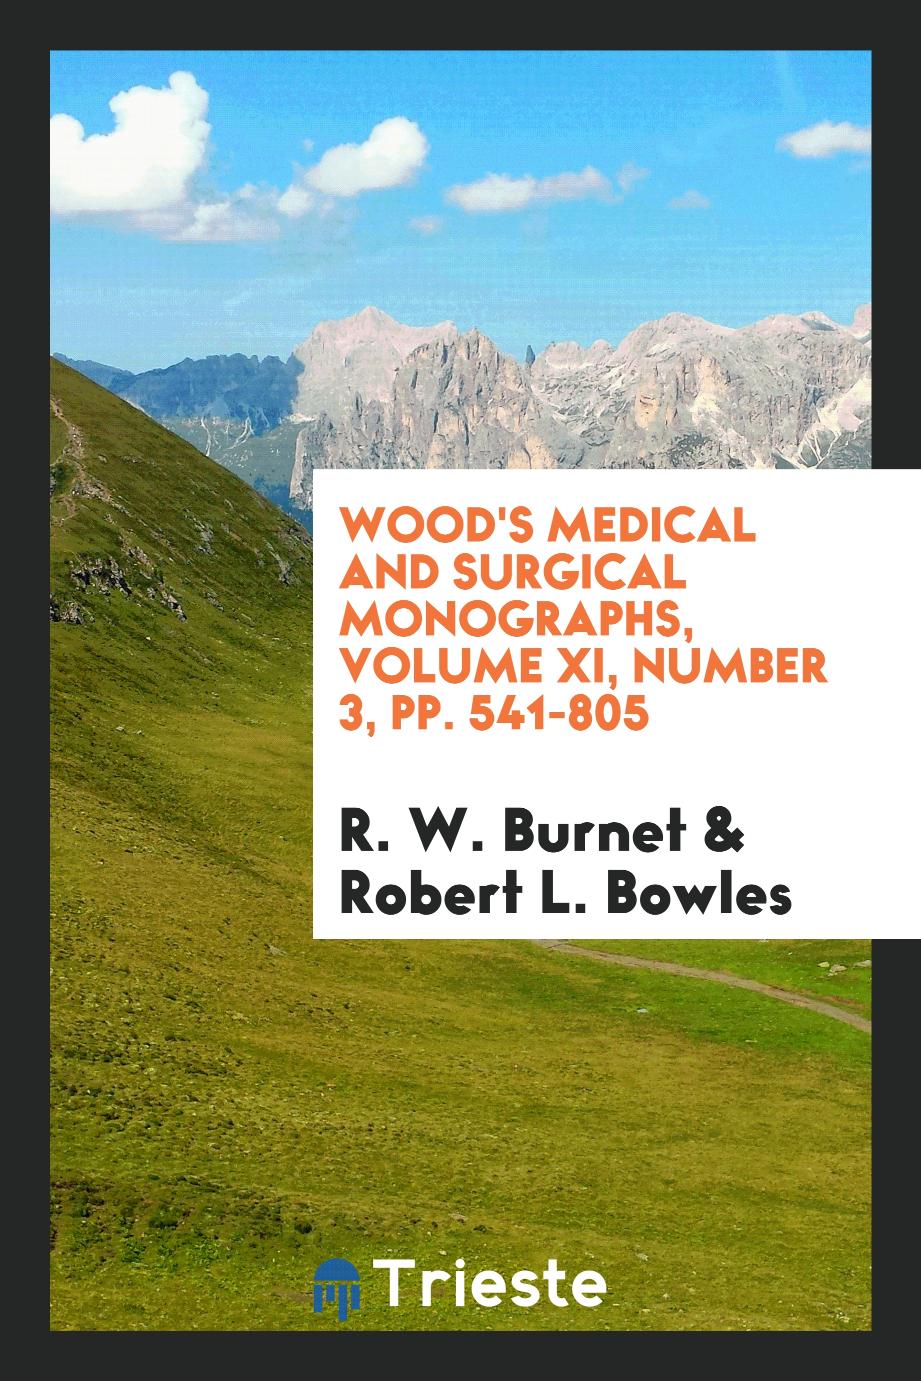 Wood's Medical and Surgical Monographs, Volume XI, Number 3, pp. 541-805